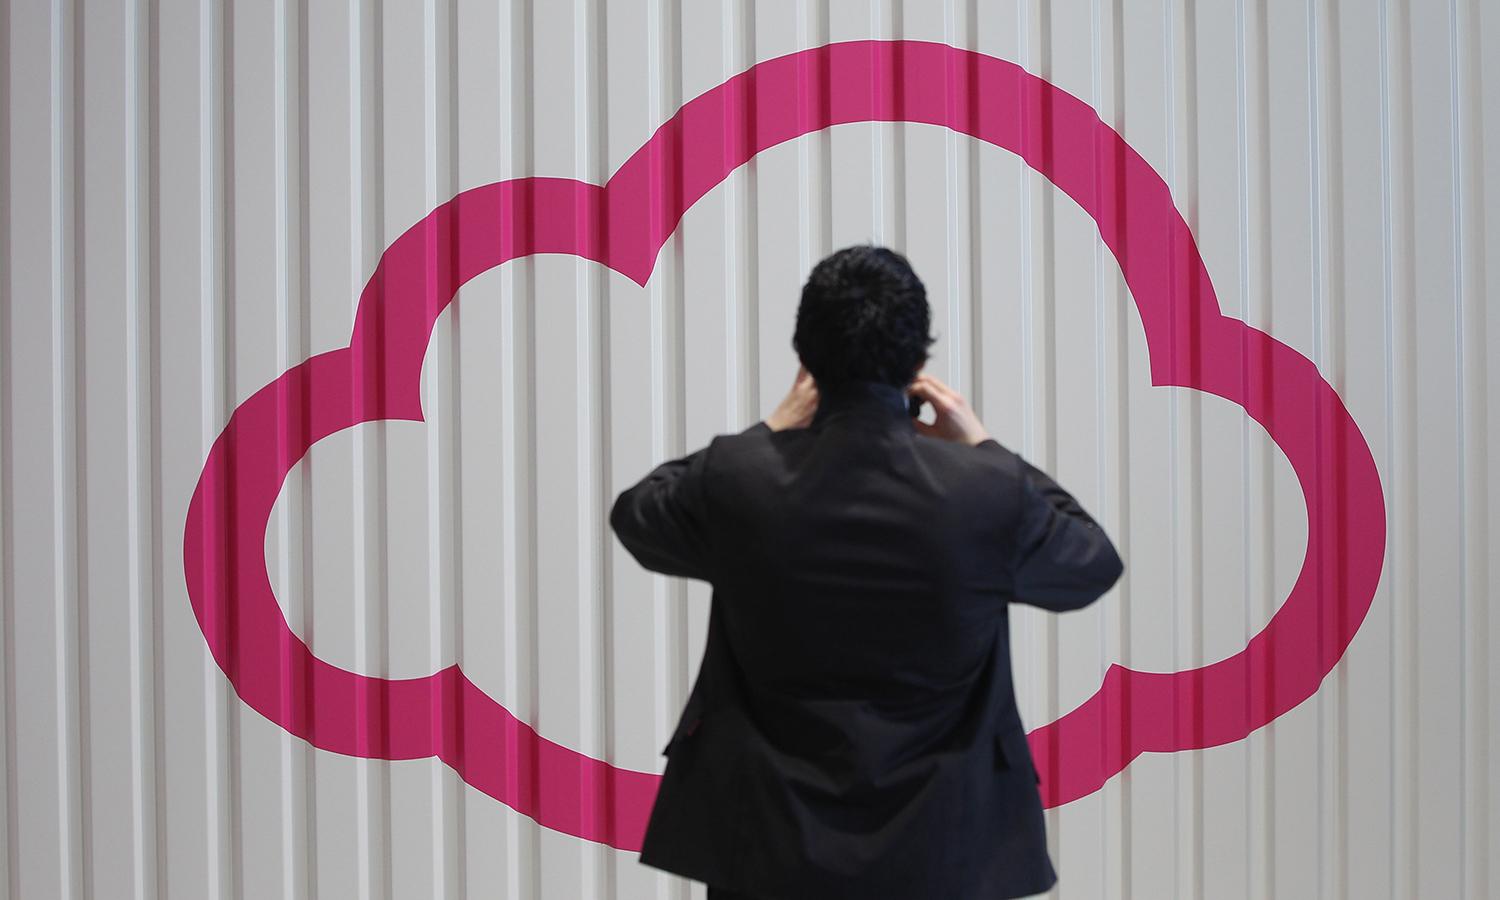 A visitor photographs a symbol of a cloud at the CeBIT 2012 technology trade fair in Hanover, Germany. (Photo by Sean Gallup/Getty Images)